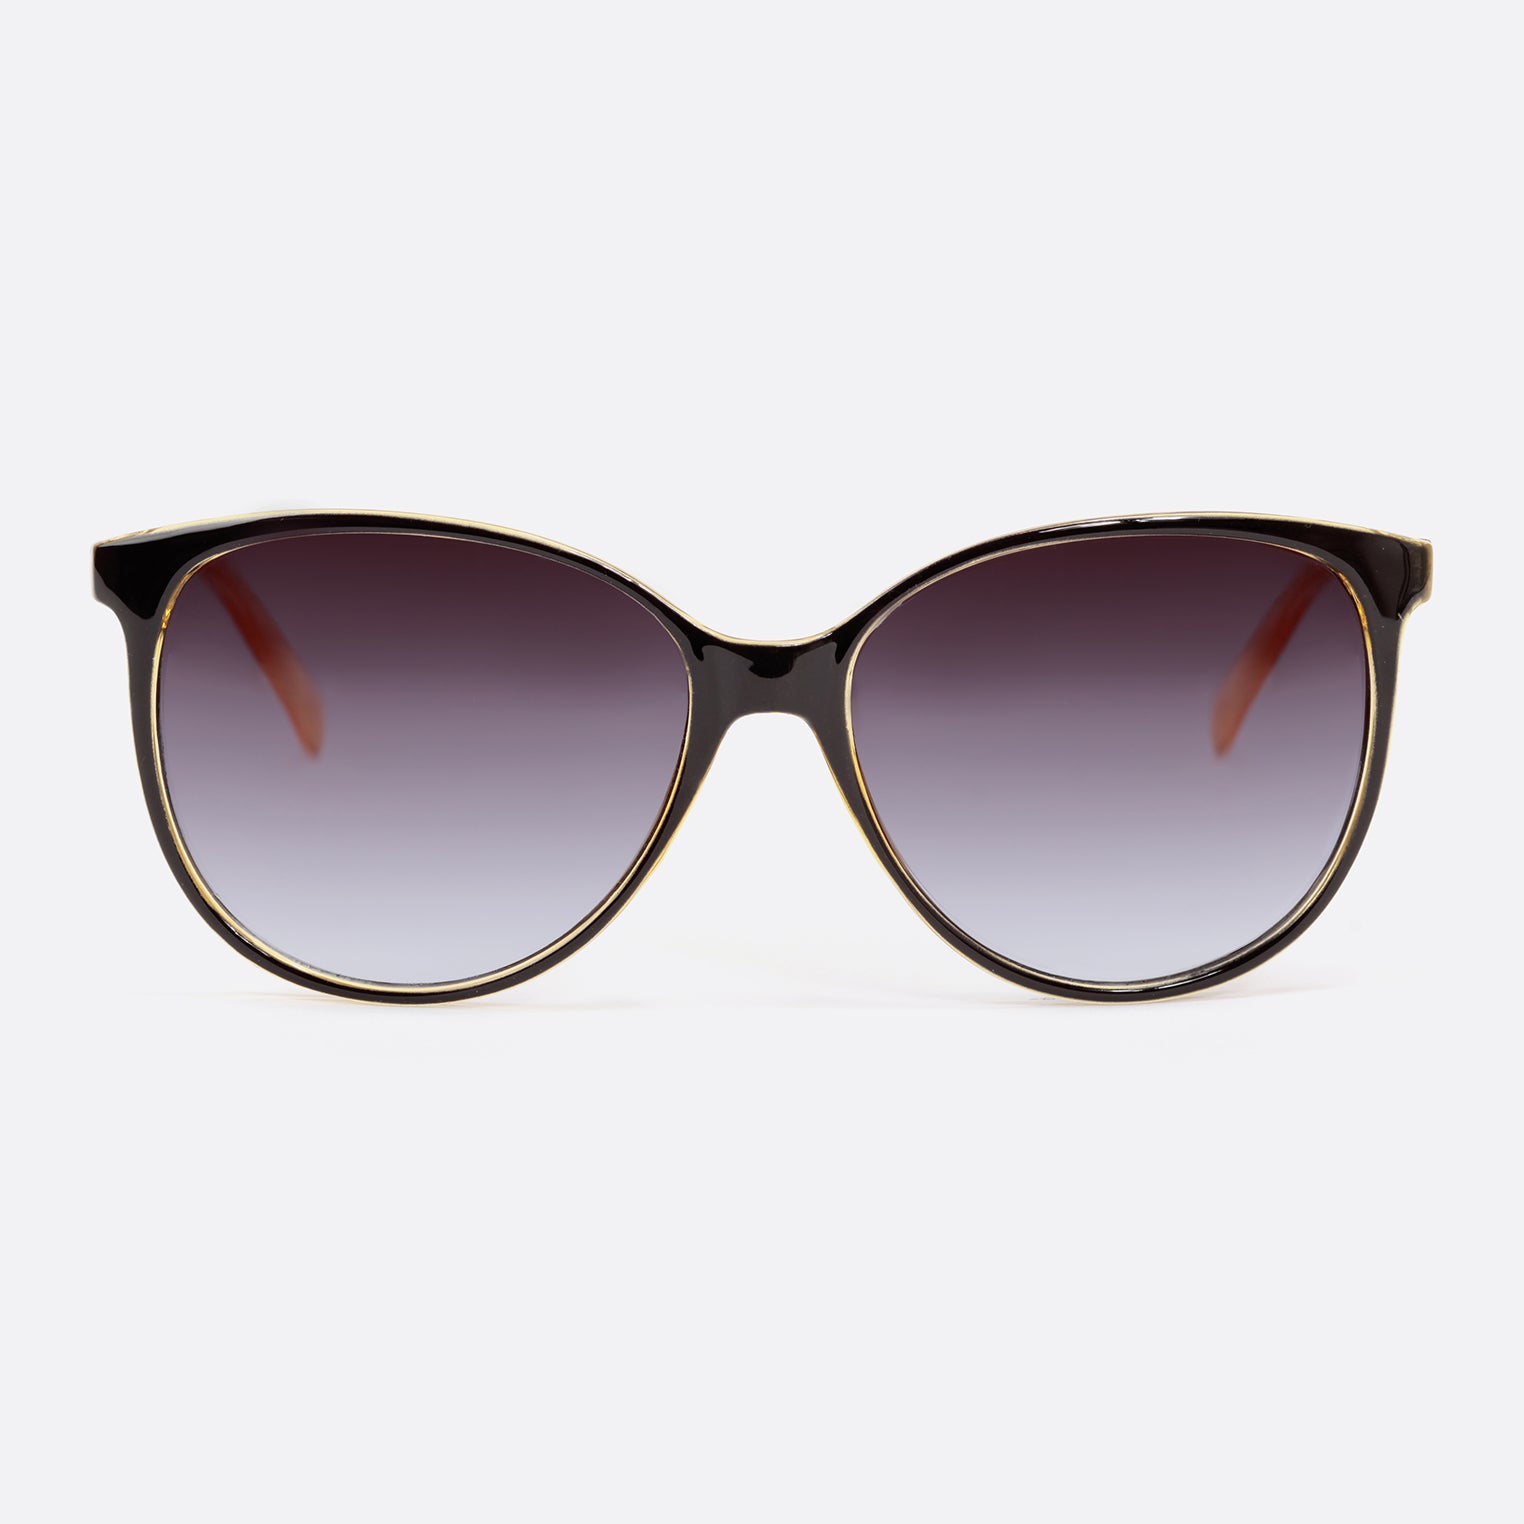 Cat eye sunglasses with beige branches